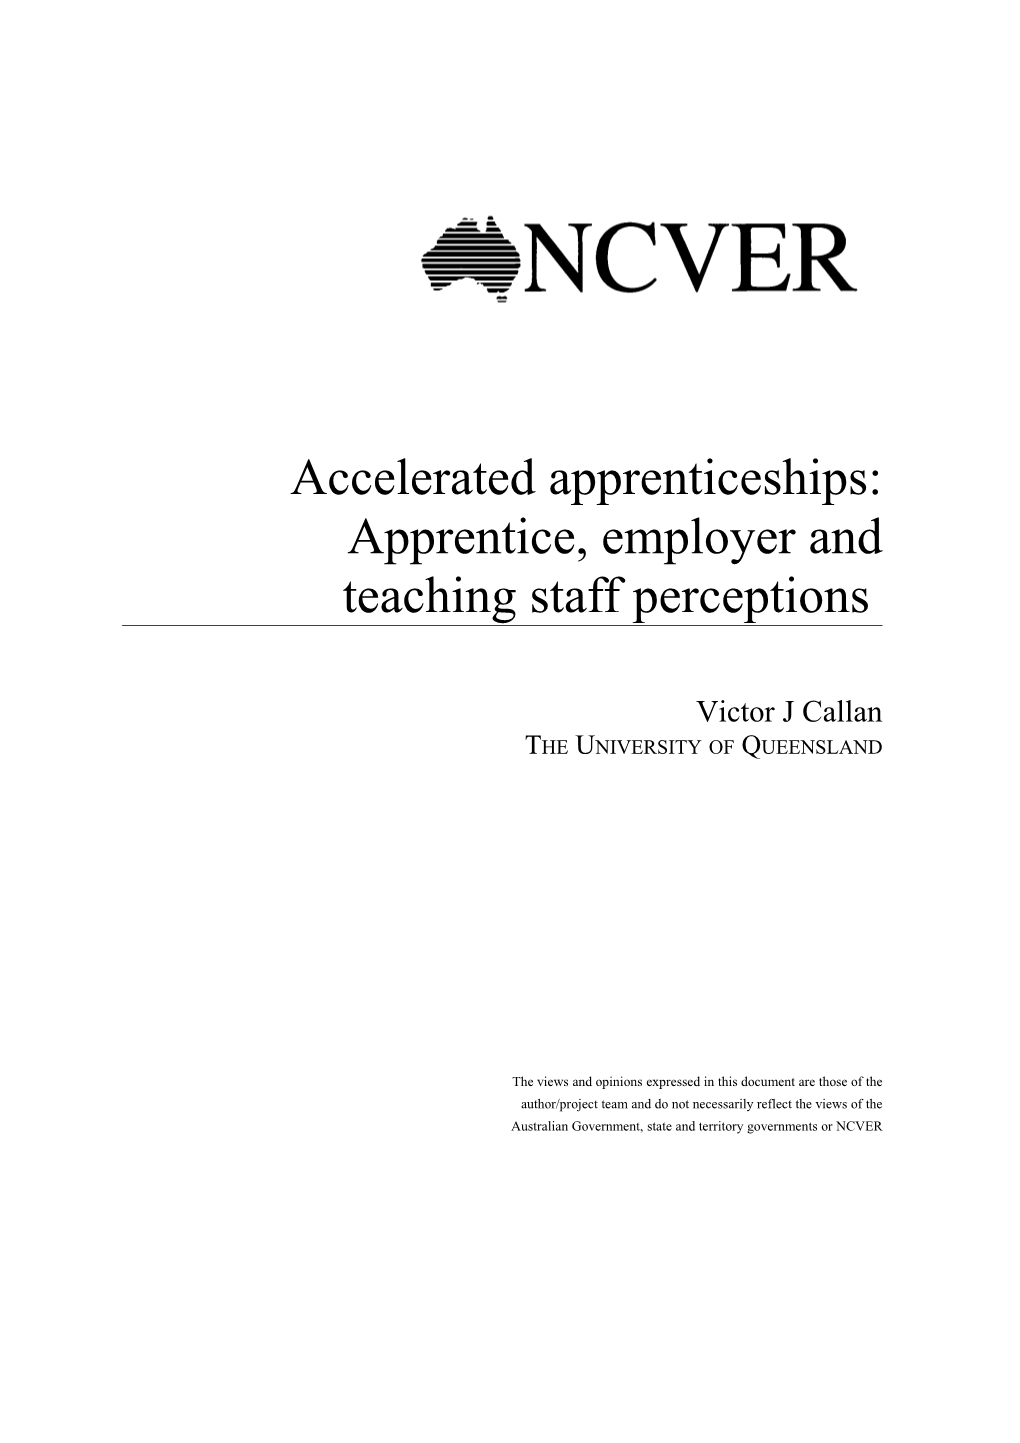 Accelerated Apprenticeships: Apprentice, Employer and Teachingstaff Perceptions